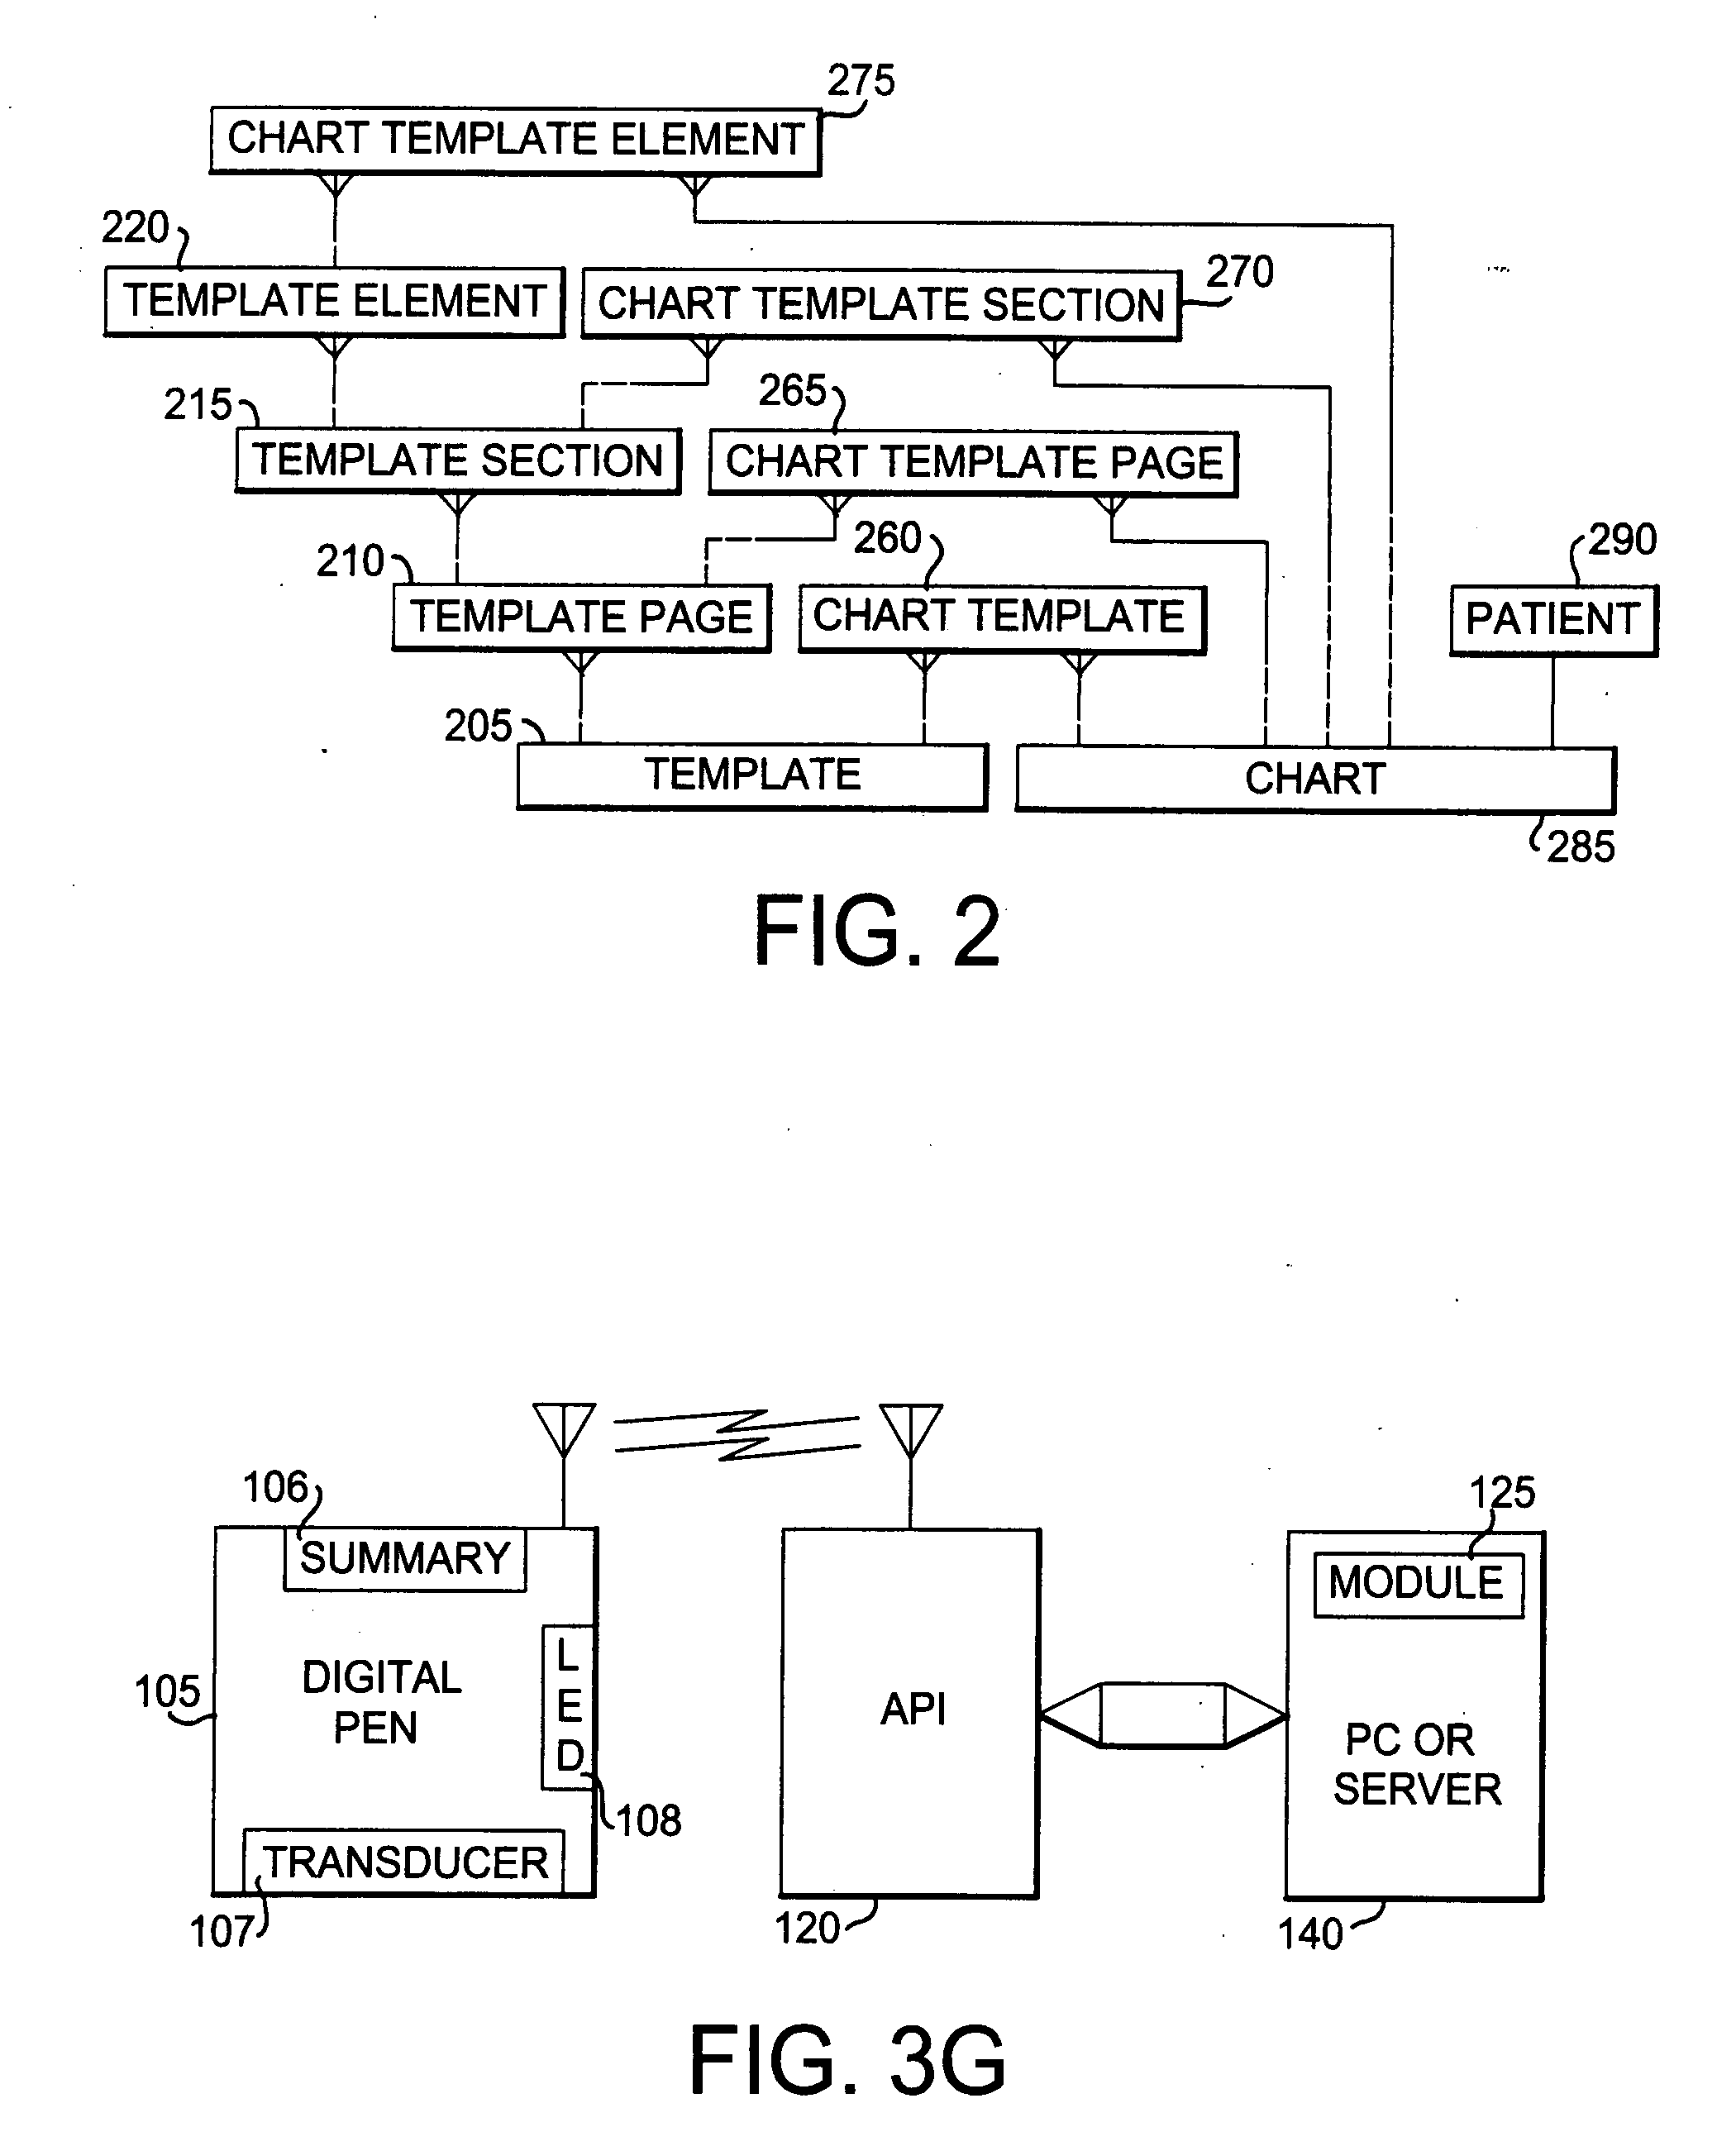 System for electronic documentation and validation of information